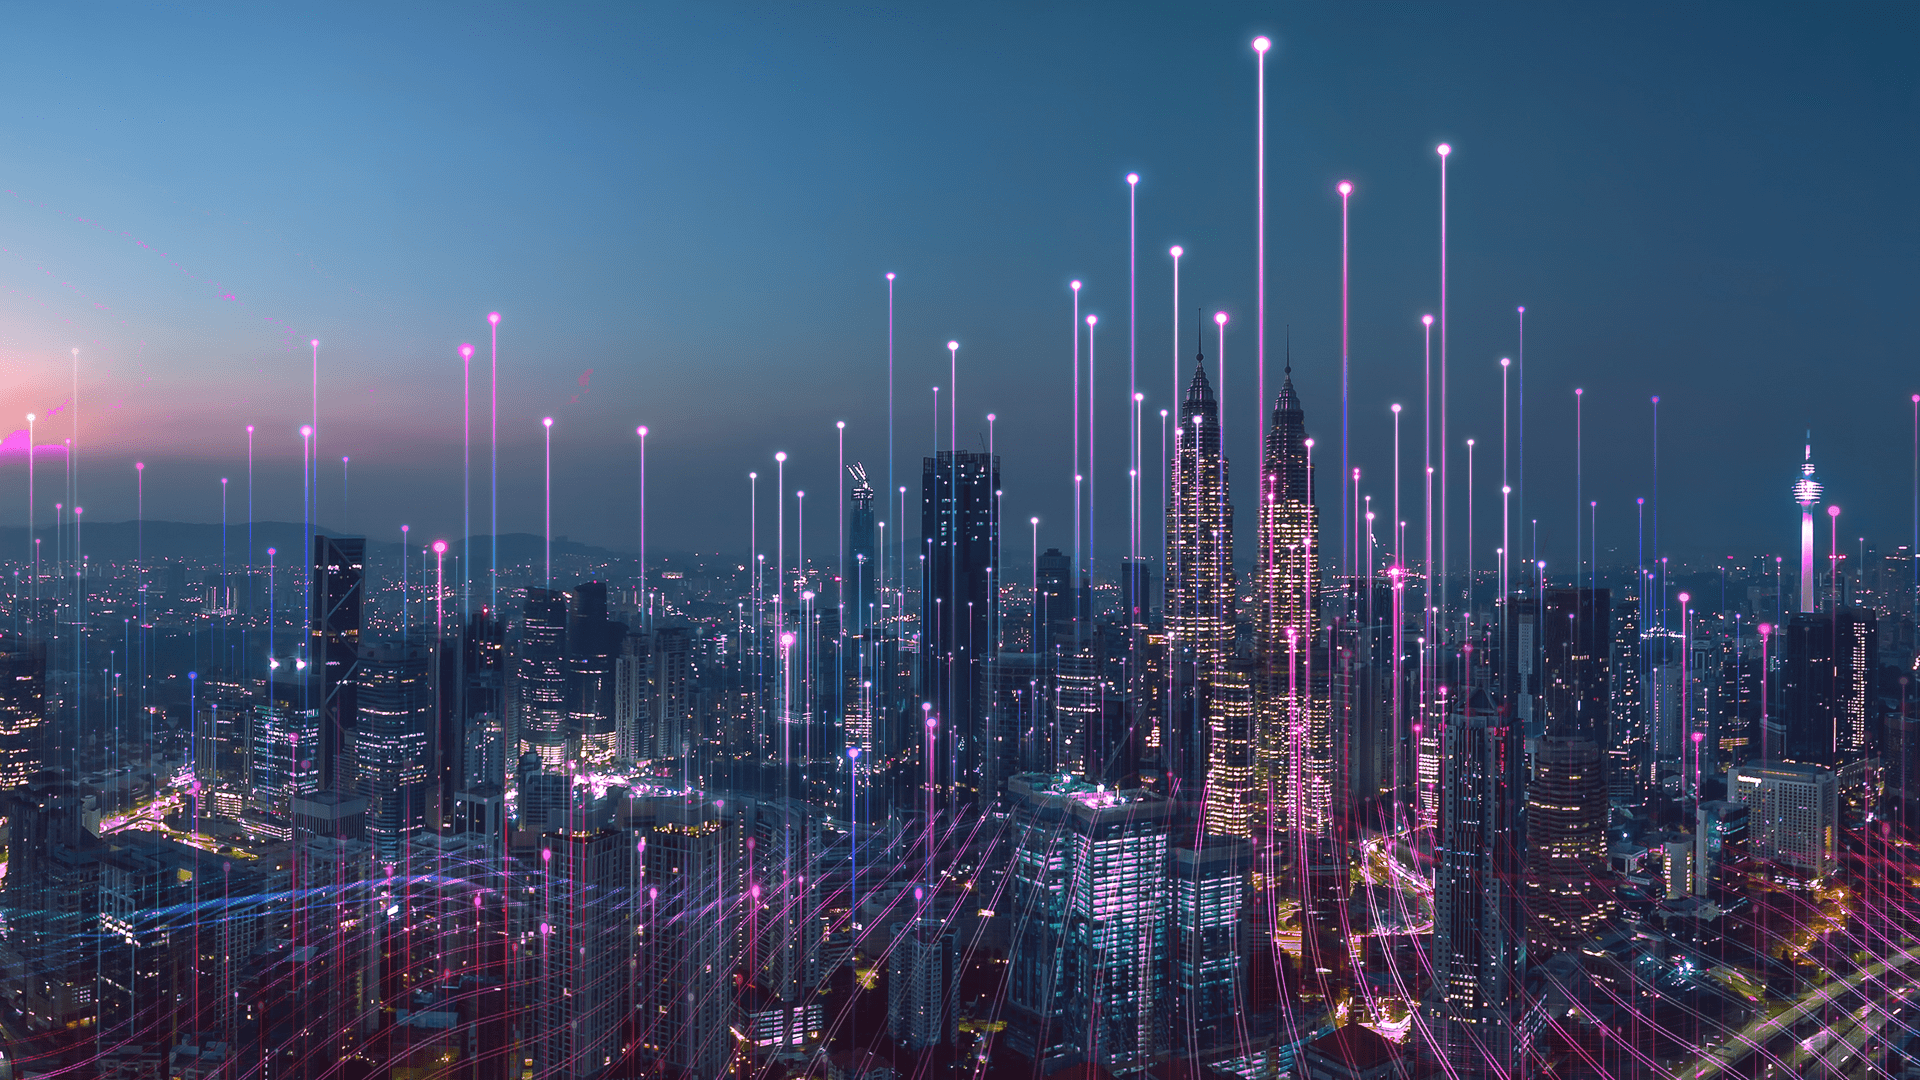 City skyline with tall buildings, lights and pink neon lines moving towards the sky.
